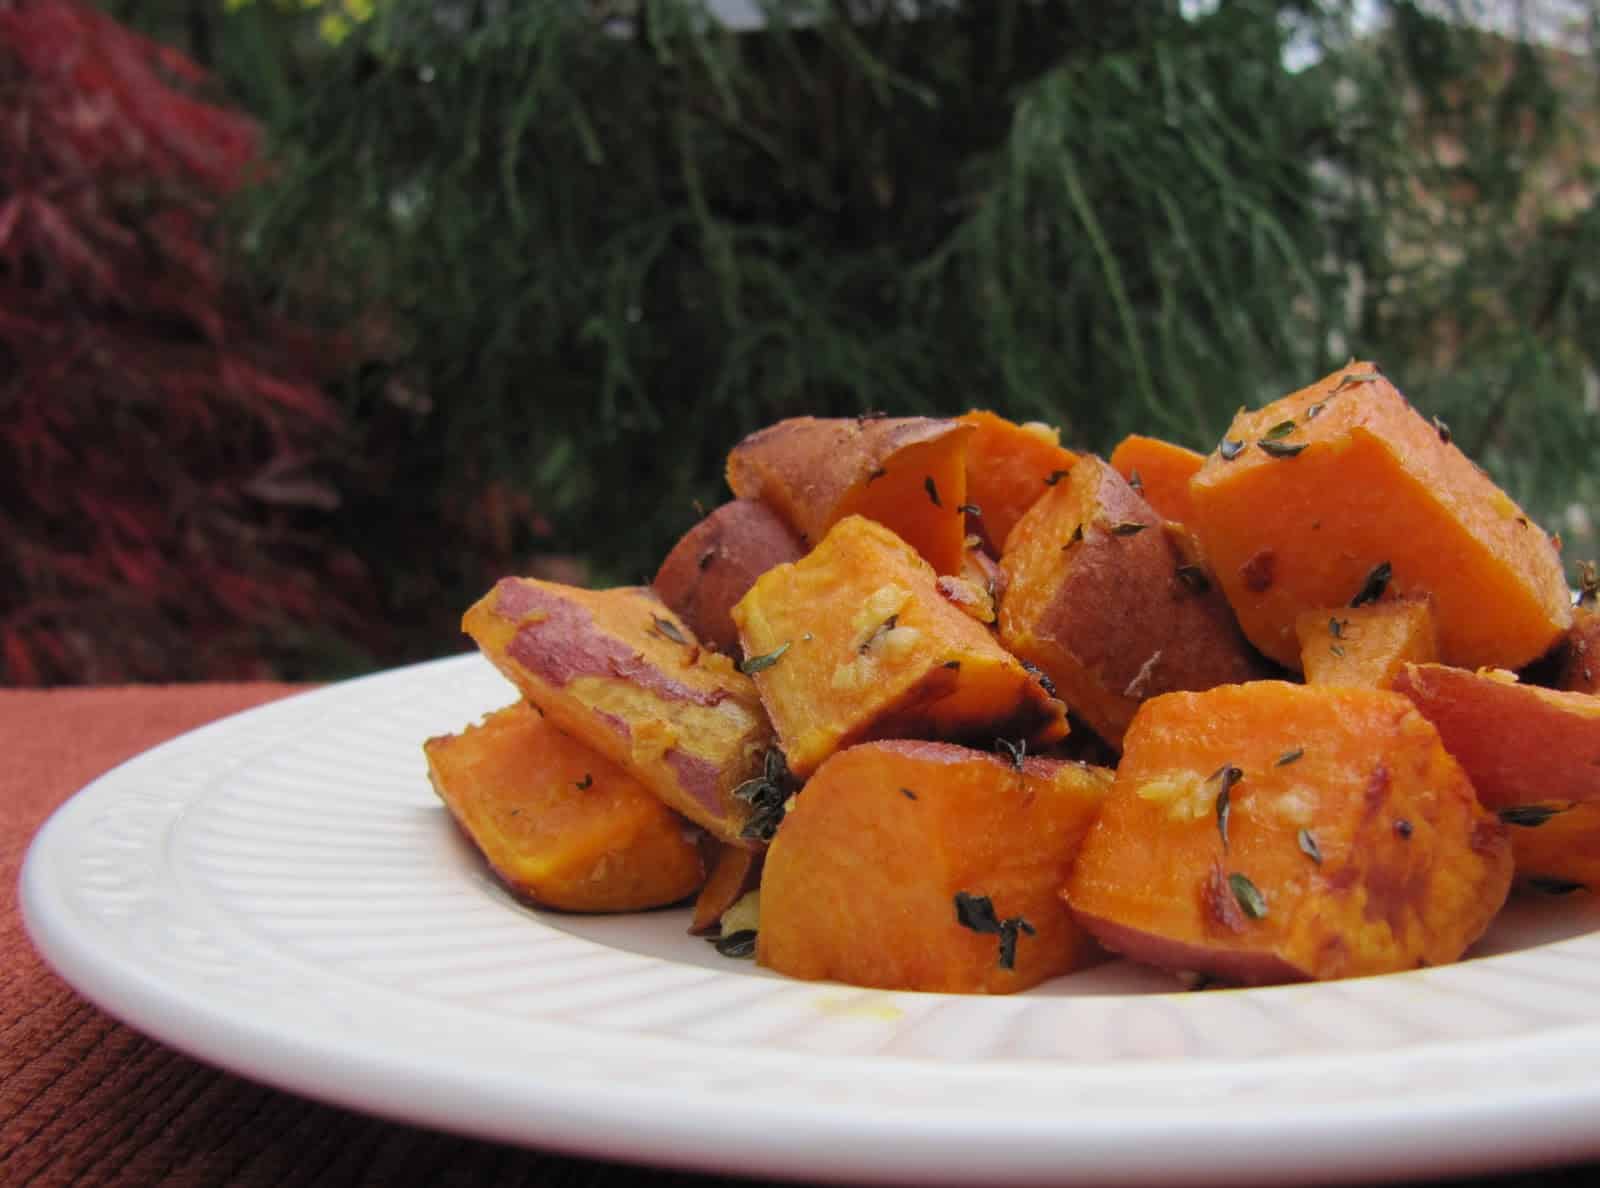 A serving of Thyme Roasted Sweet Potatoes on a white plate.